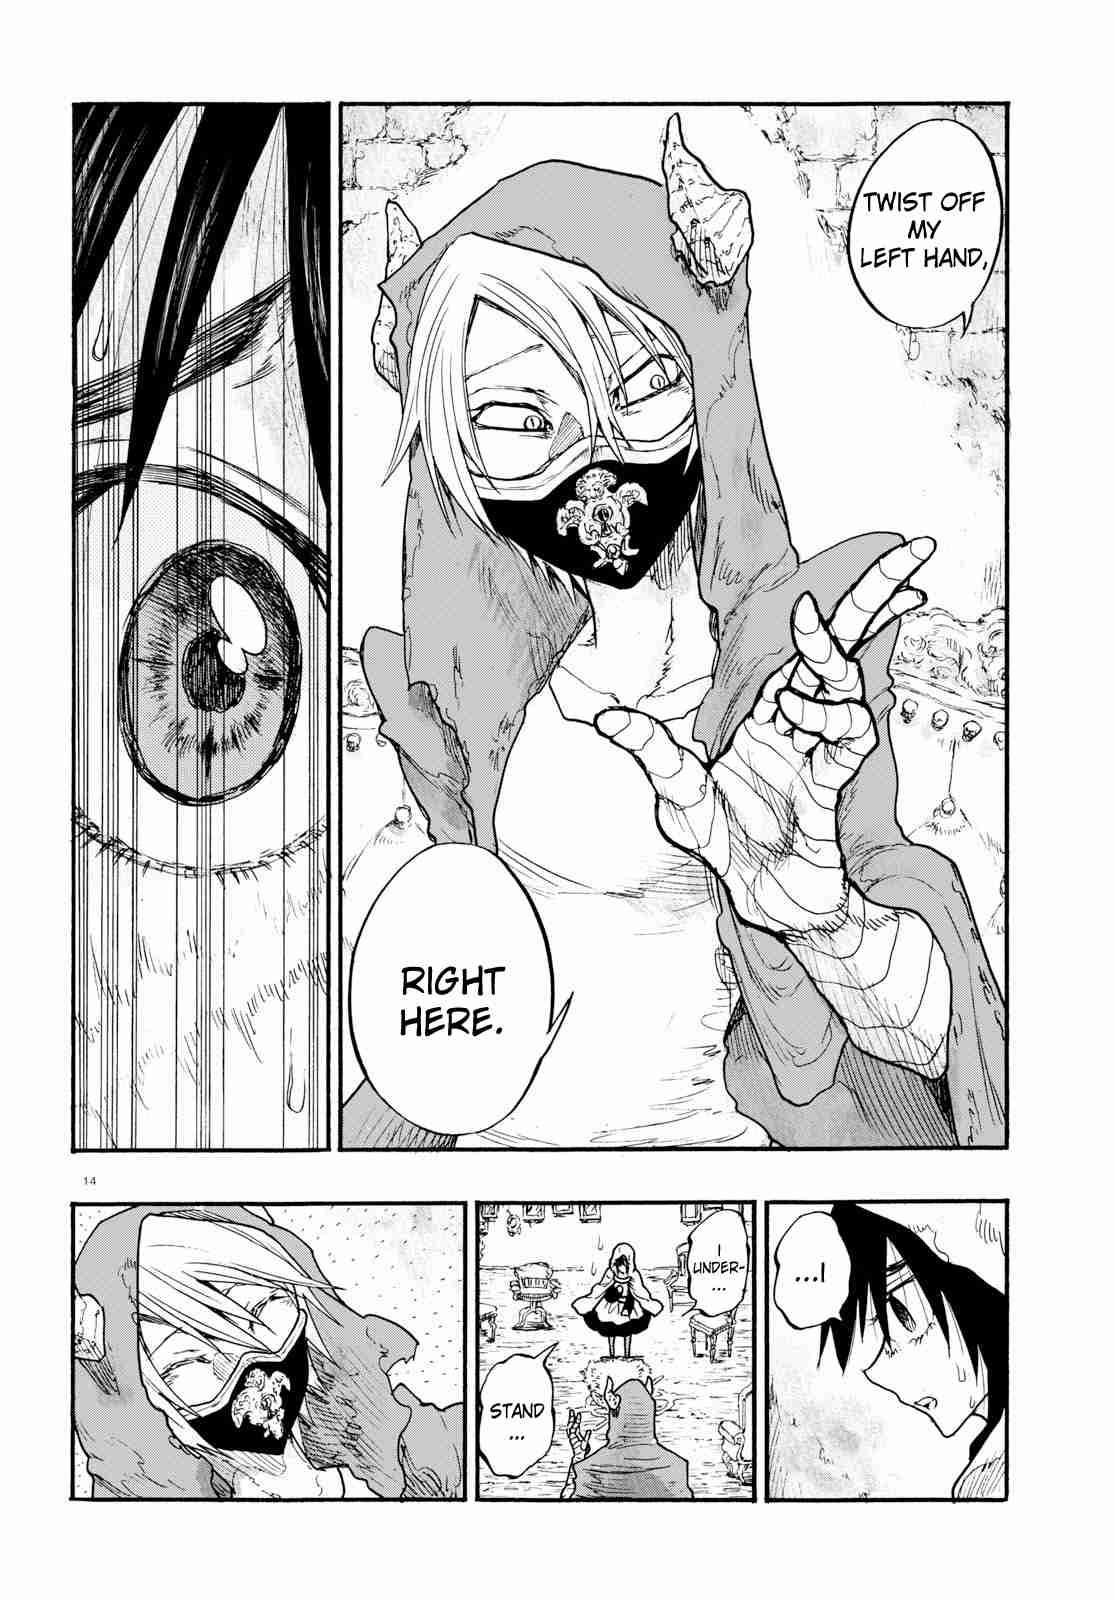 How To Become A Demon Girl Vol. 1 Ch. 4 Scio